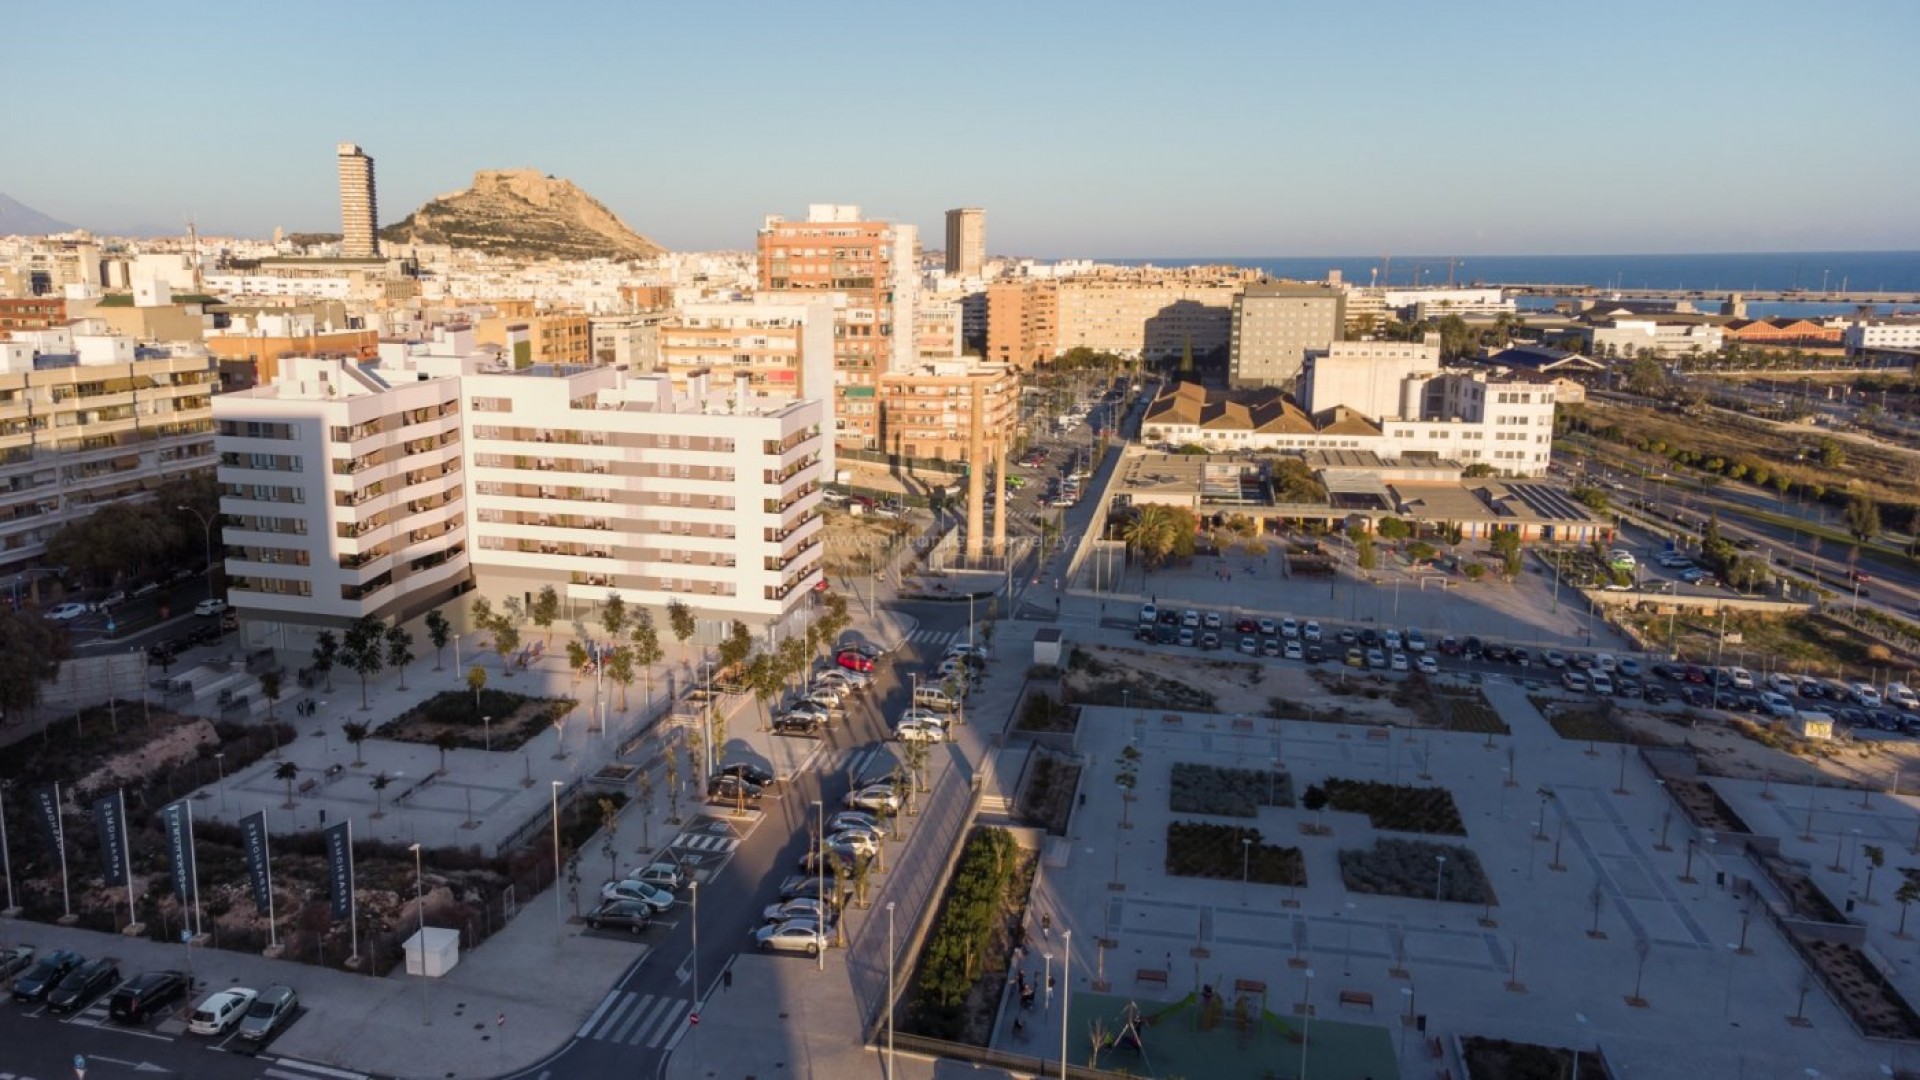 Flats/apartments in Alicante city, 2/3 bedrooms, 2 bathrooms, roof terrace with fantastic sea views, gym and garage in the residential complex. Close to the city center